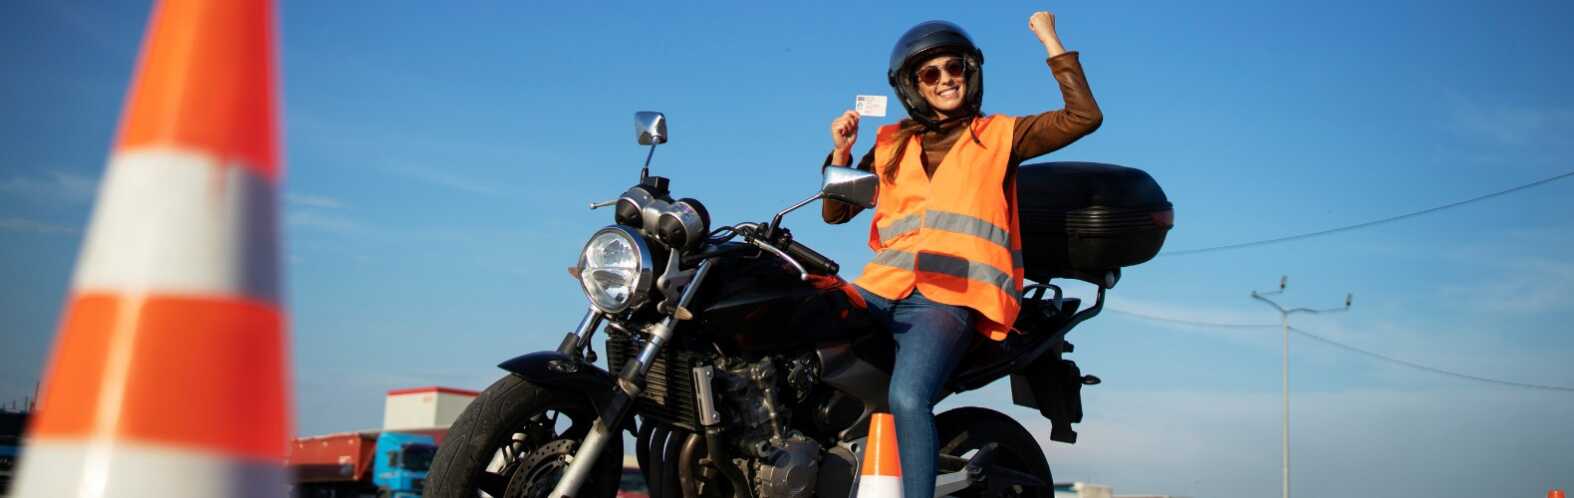 how to get your motorcycle license